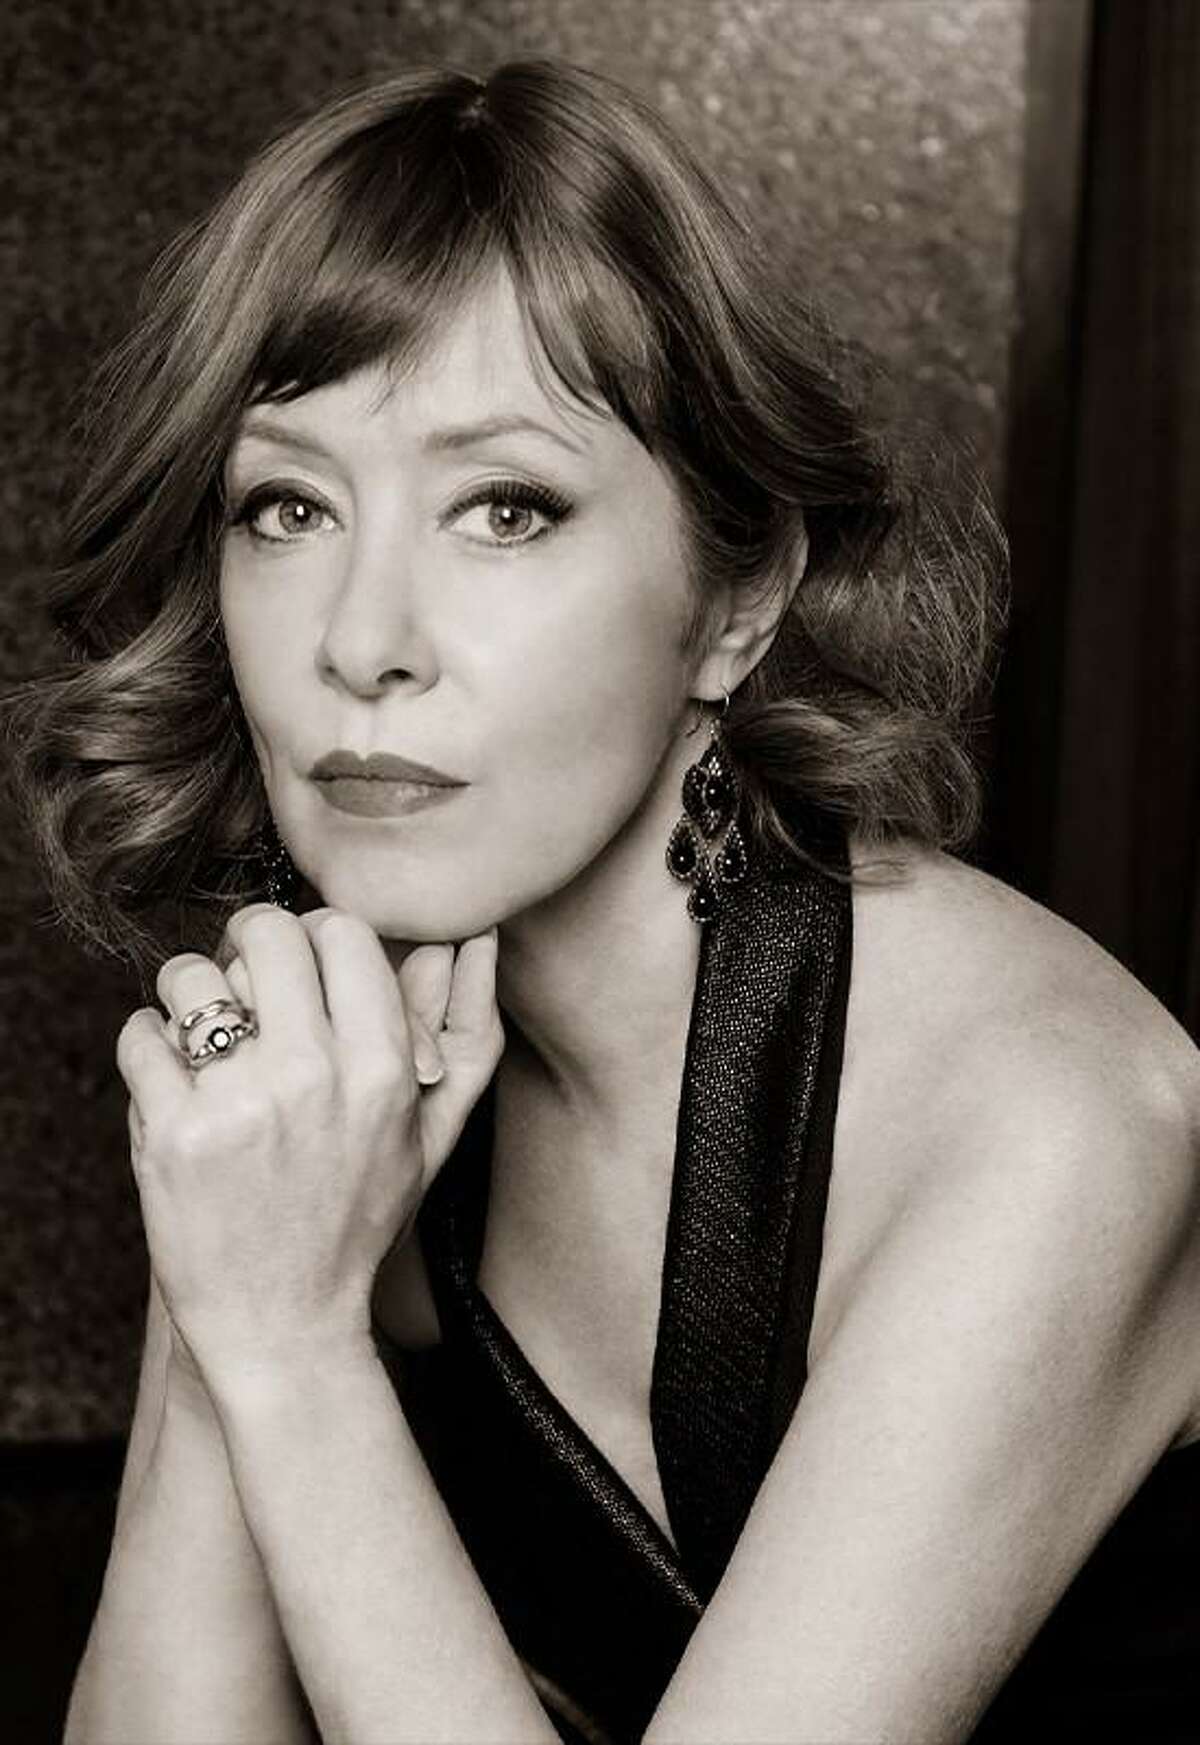 Suzanne Vega will perform via a Livestream from Blue Note Jazz Club on Oct. 7 at 9 p.m. Tickets are $15-$25. For more information, visit ridgefieldplayhouse.org.